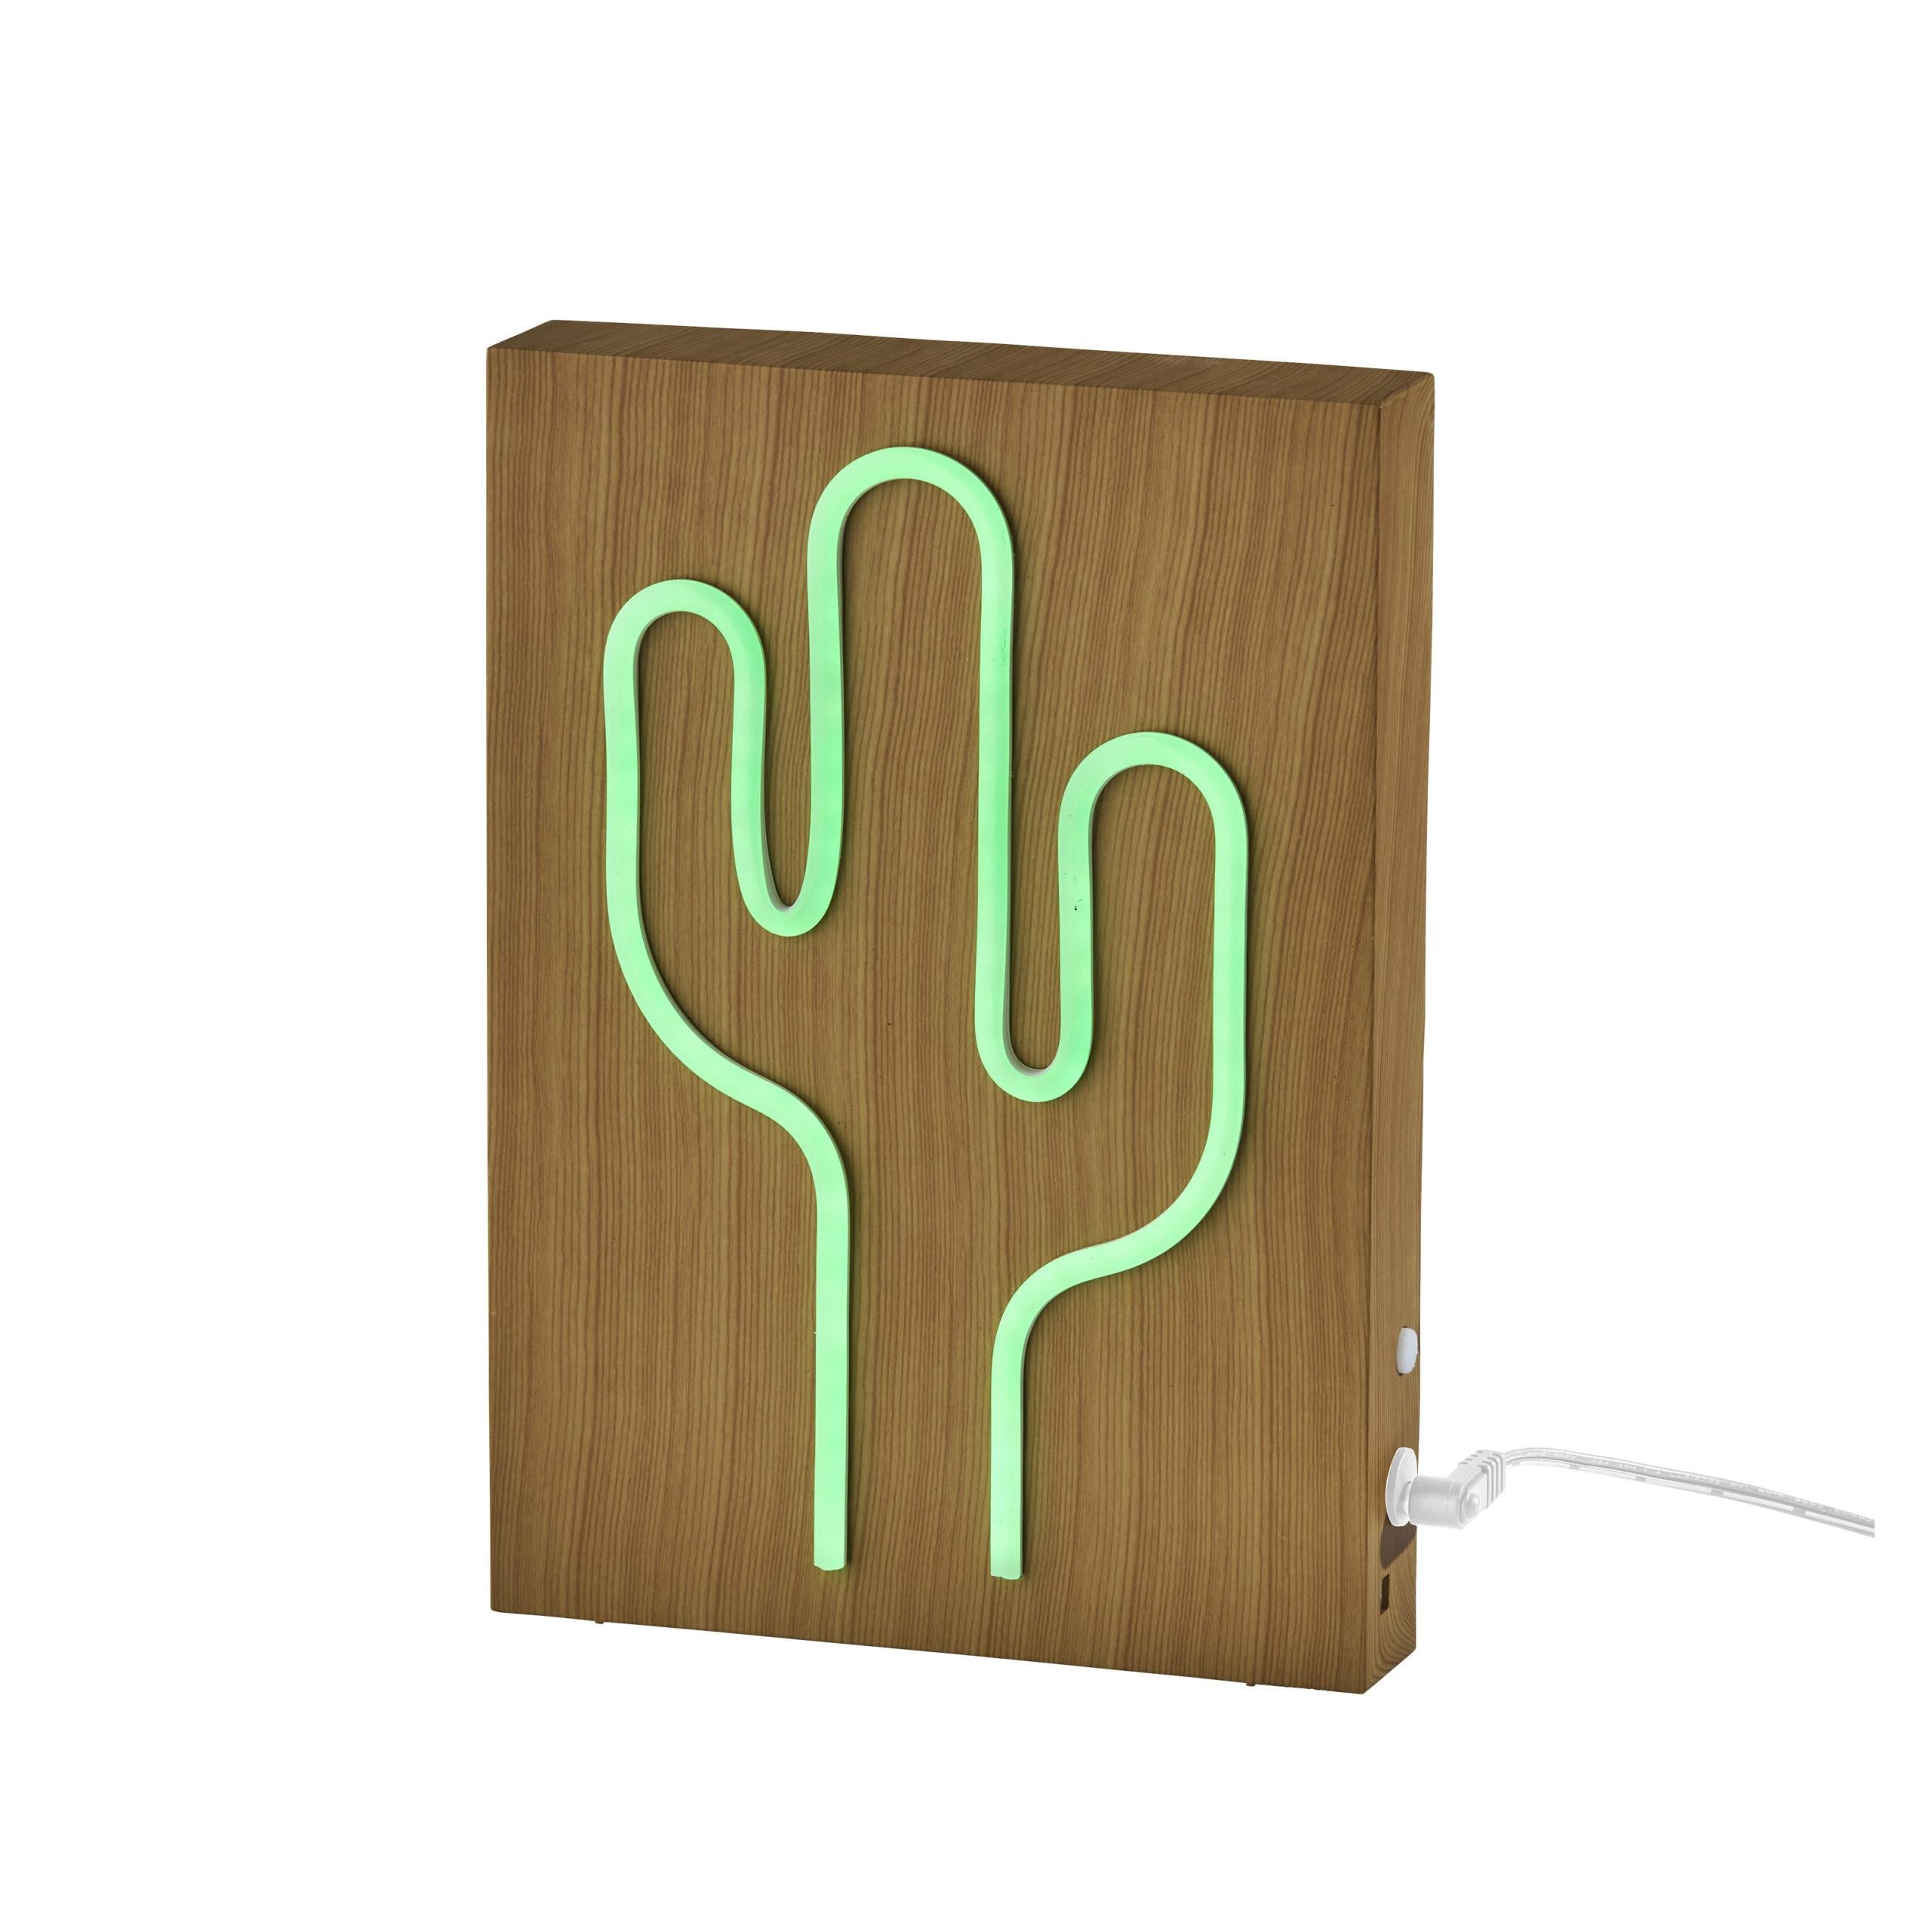 Wood Natural Wood Finish Framed Neon Cactus Wall Lamp by Adesso Furniture